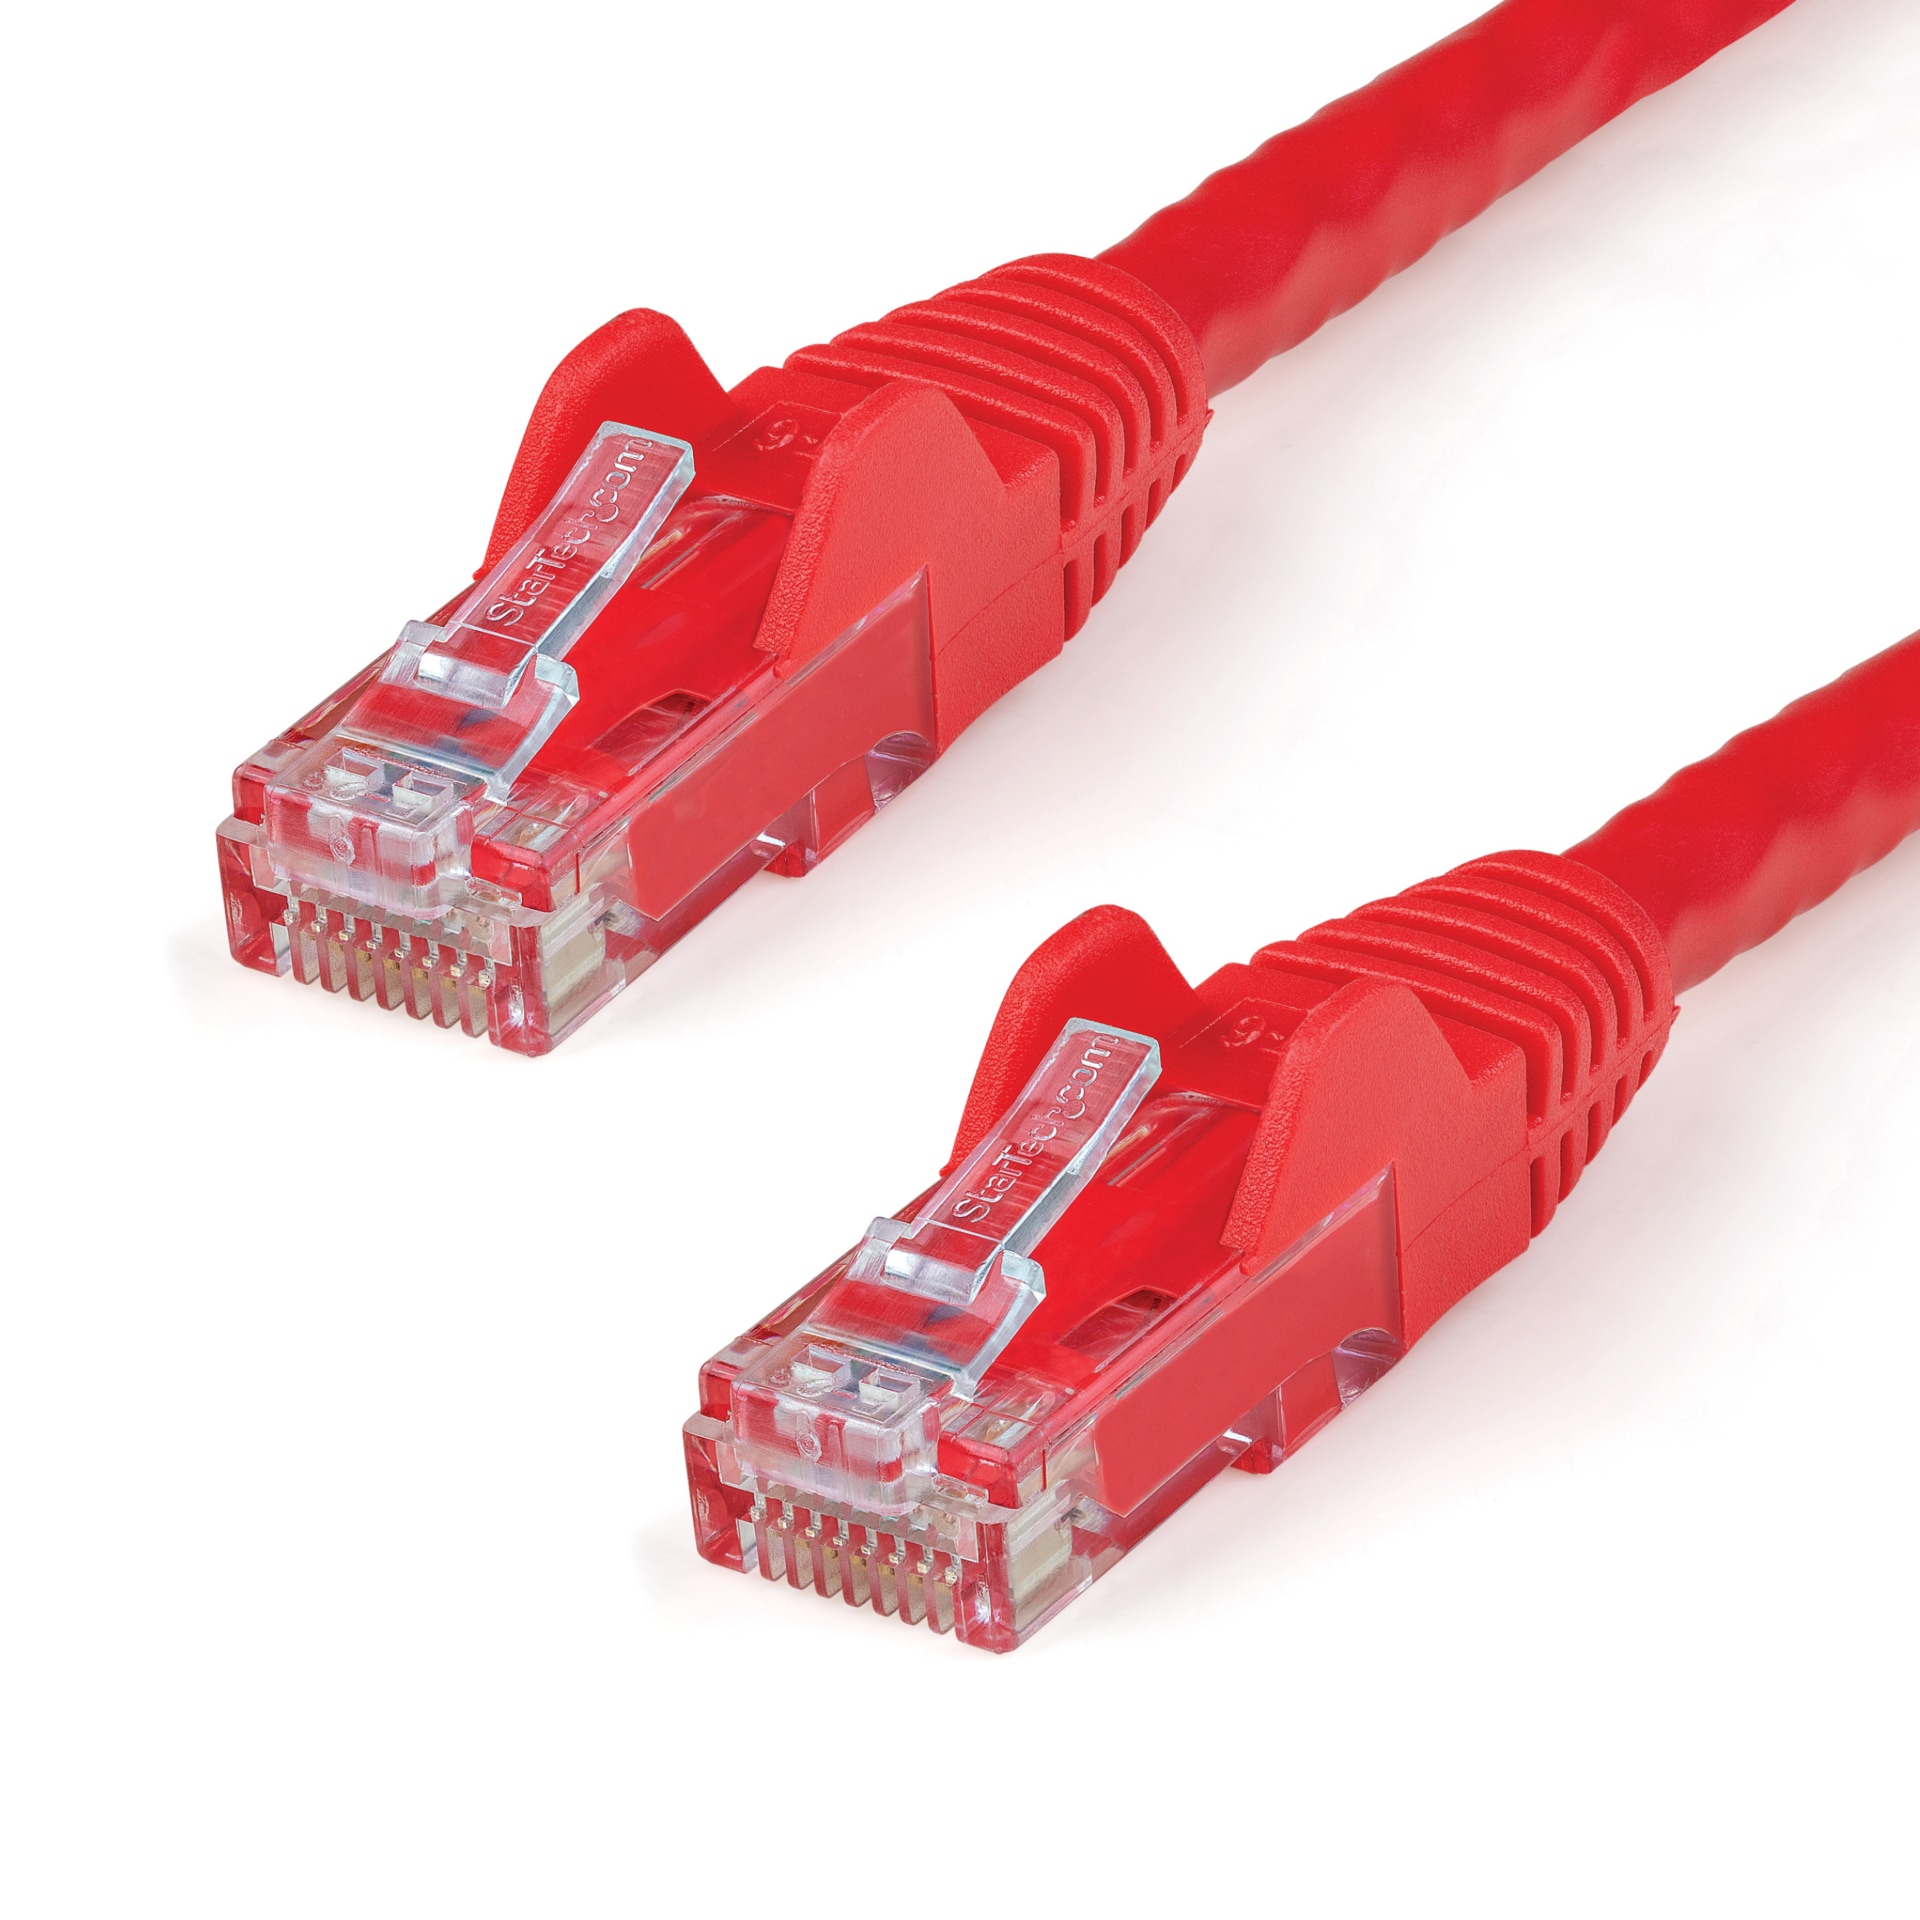 StarTech.com 10ft CAT6 Ethernet Cable Red Snagless UTP CAT 6 Gigabit Cord/Wire 100W PoE 650MHz